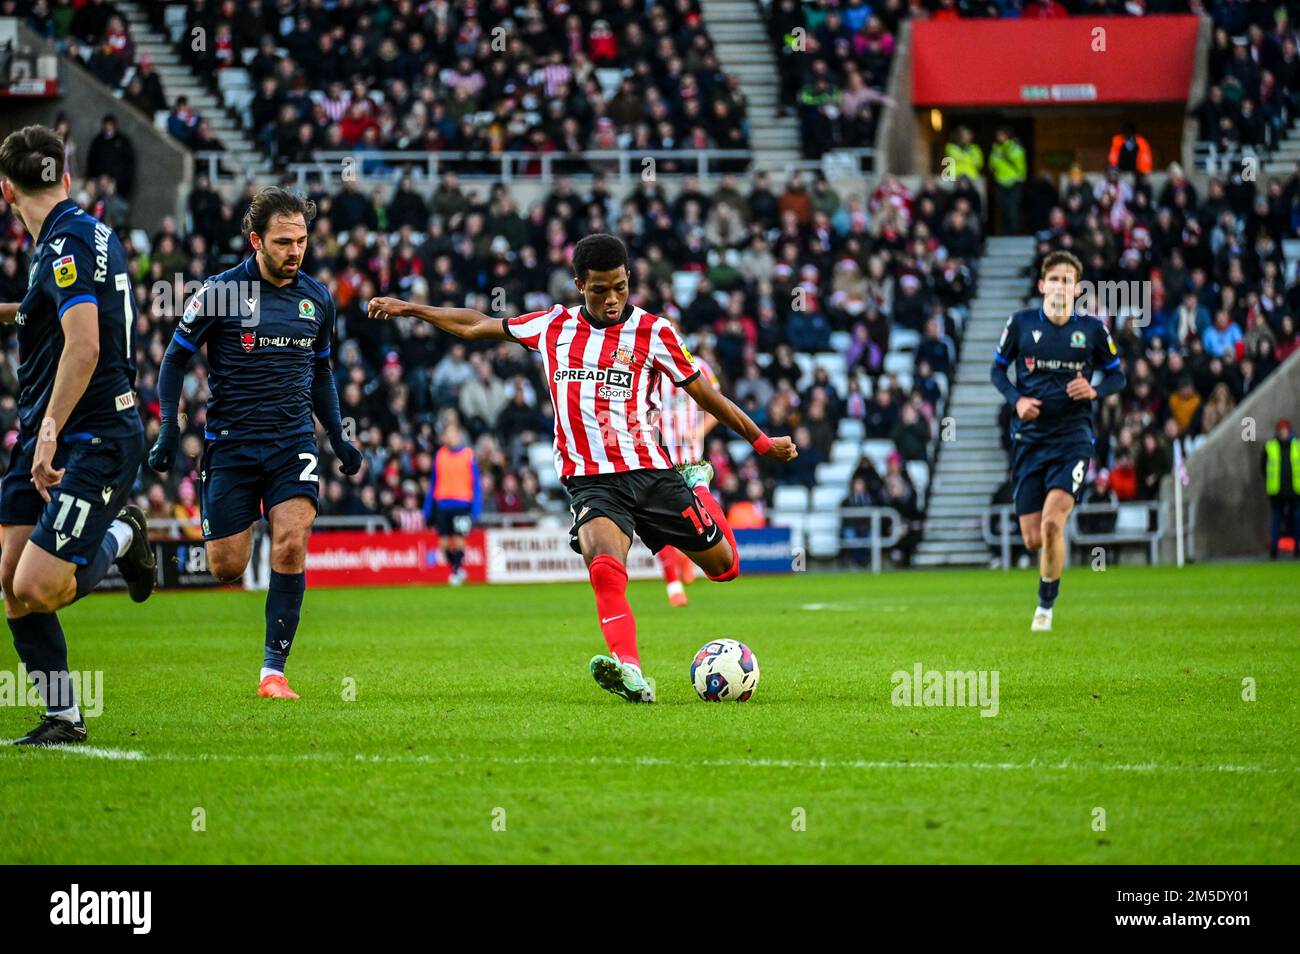 Sunderland AFC forward Amad Diallo takes a shot at goal against Blackburn Rovers in the EFL Championship. Stock Photo